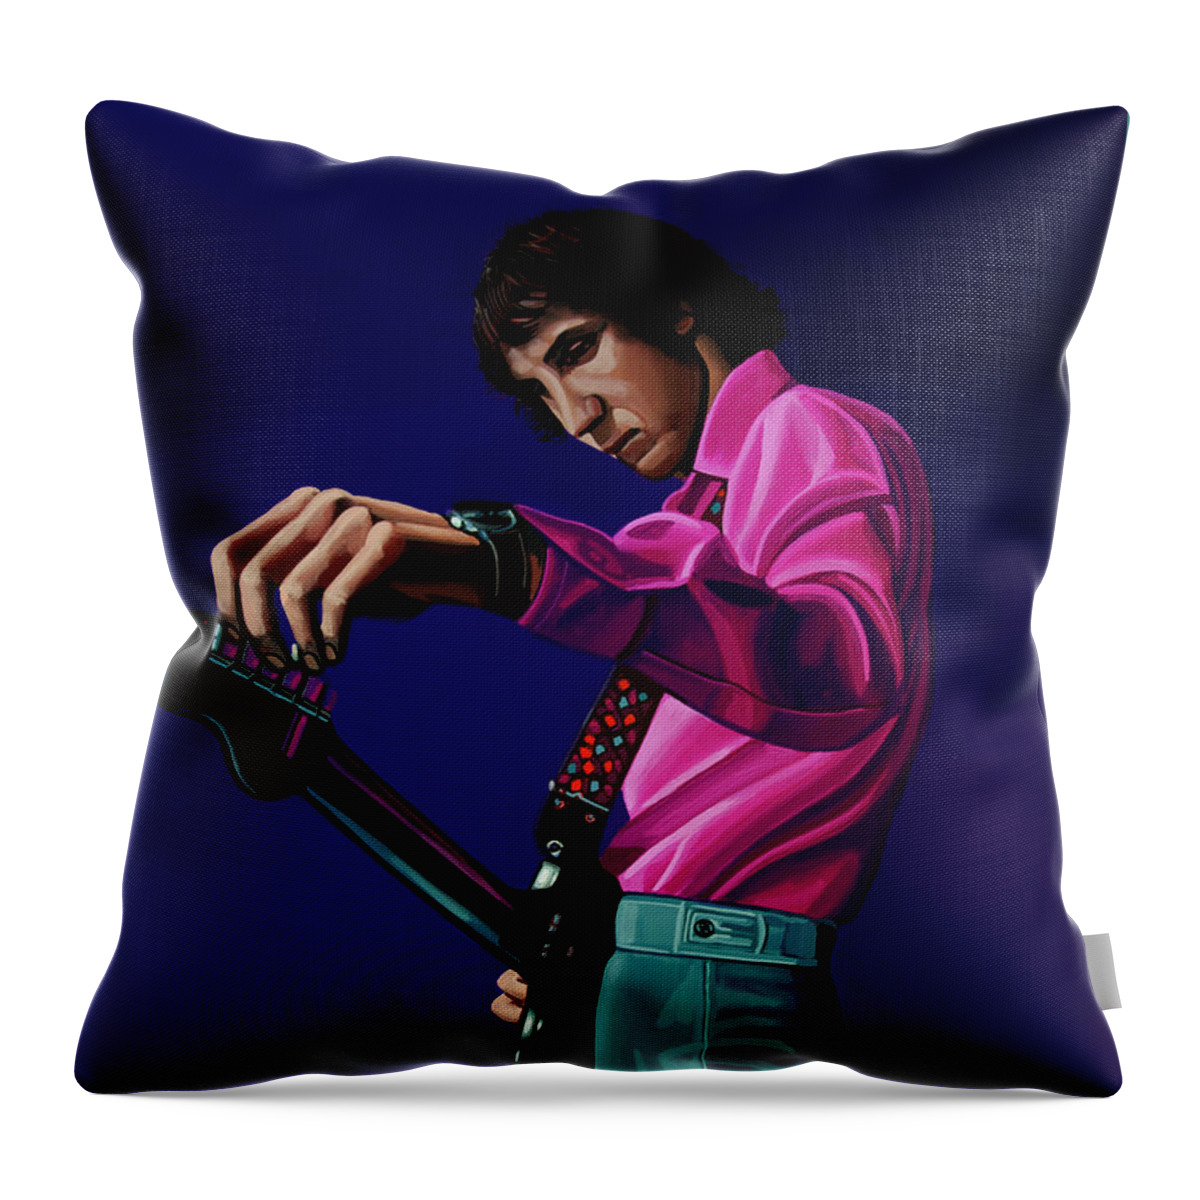 Pete Townshend Throw Pillow featuring the painting Pete Townshend Painting by Paul Meijering